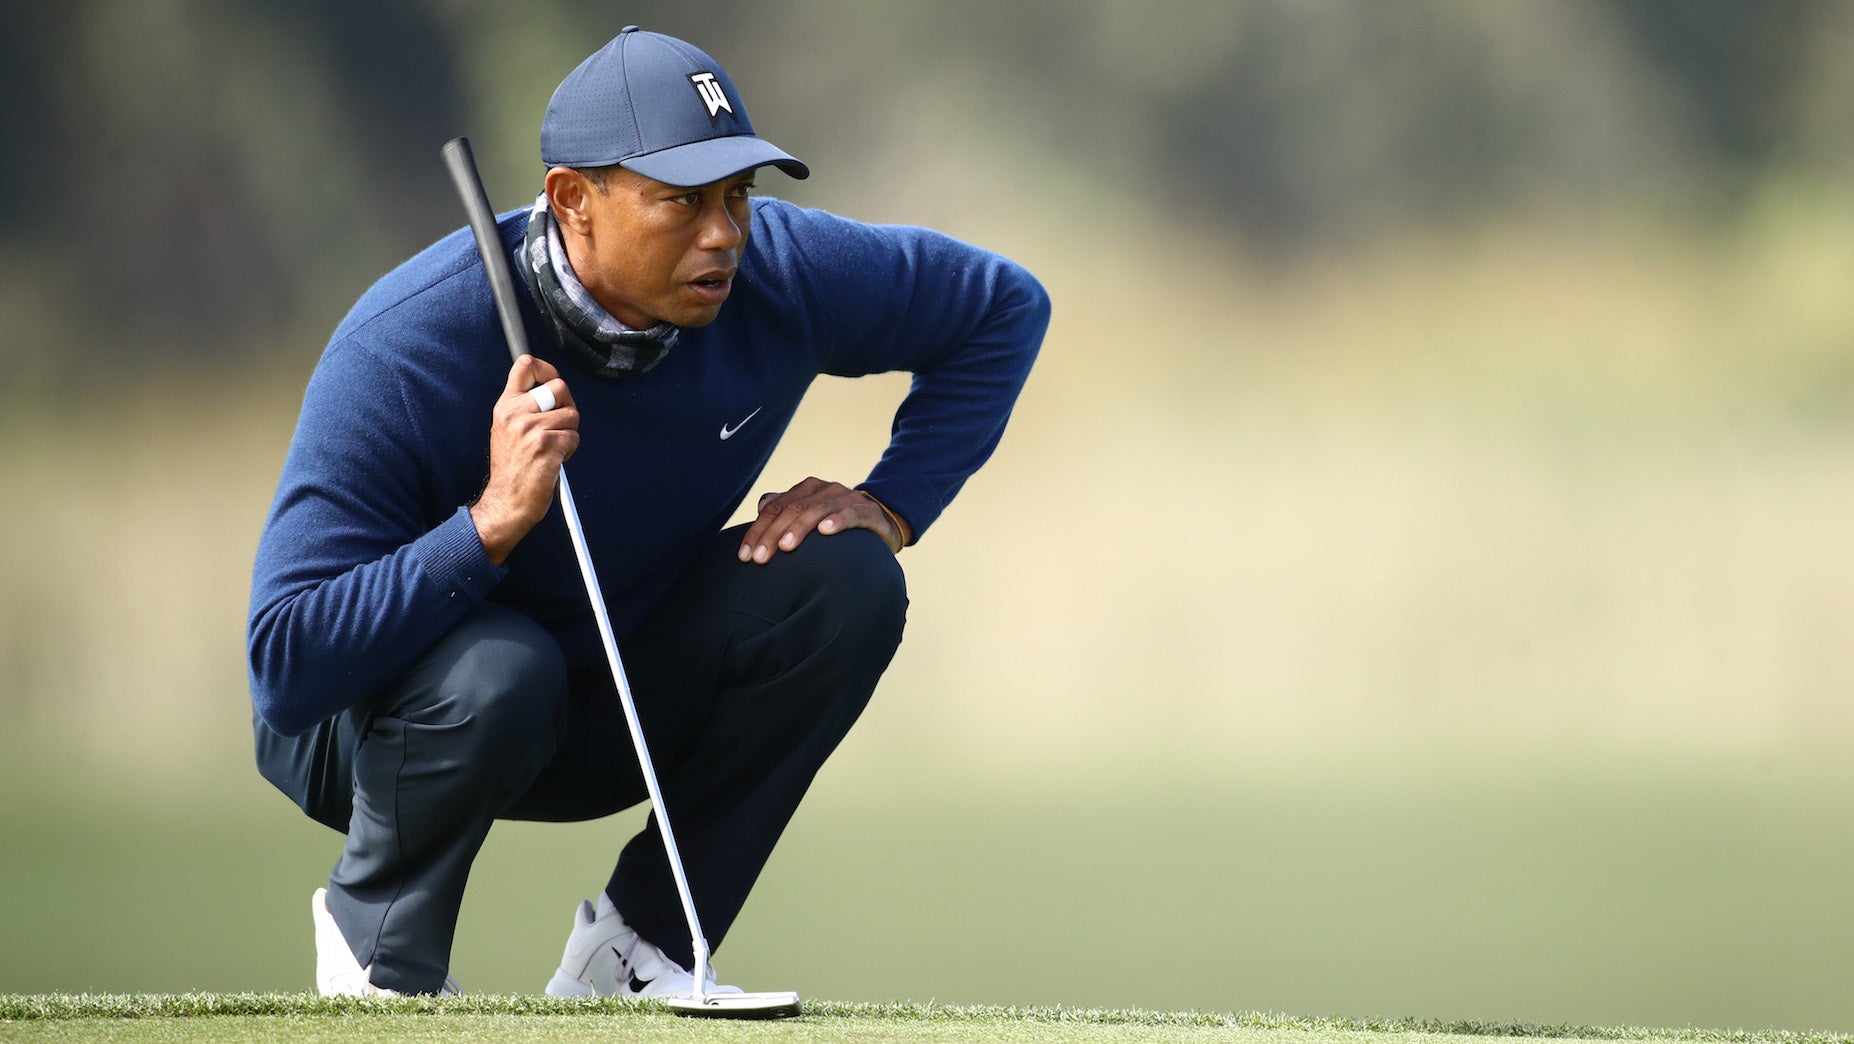 The clubs Tiger Woods is using at the 2020 PGA Championship